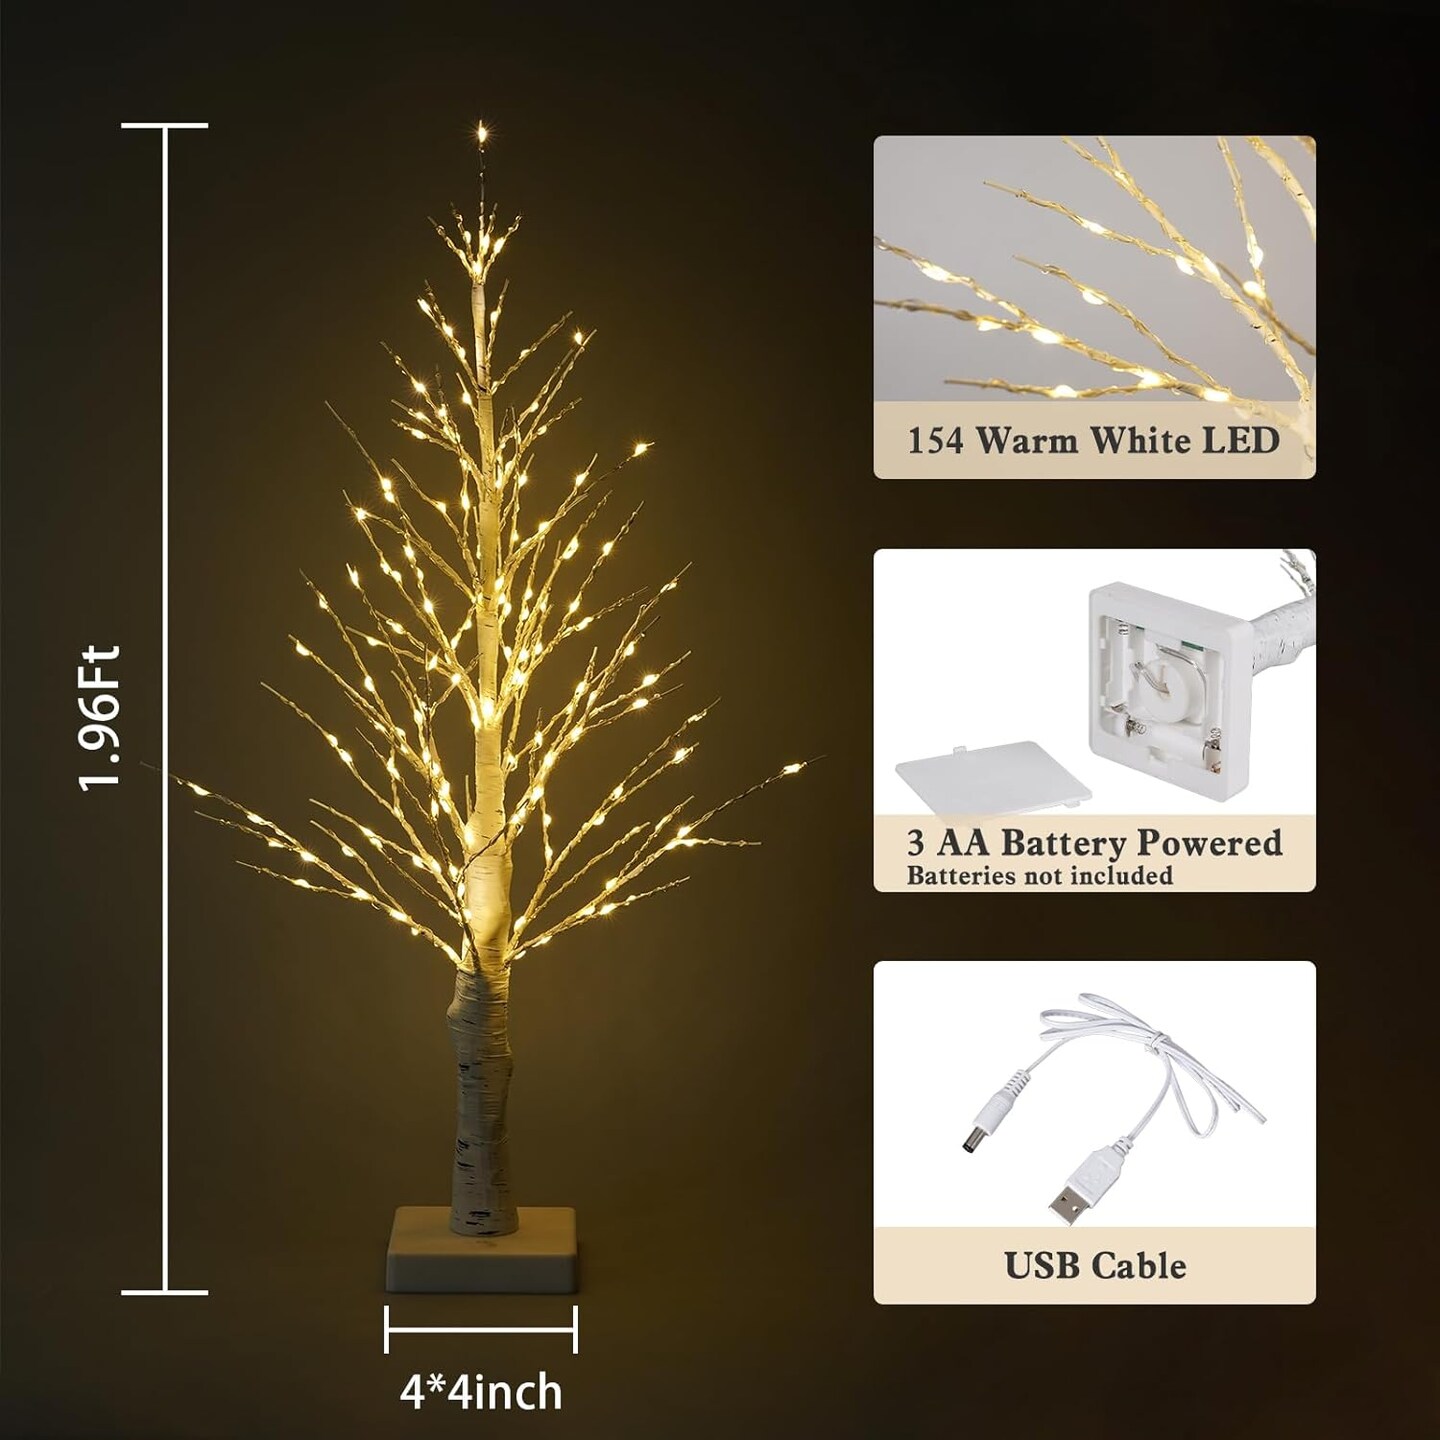 Home Decorations: Lighted Birch Tree Indoor, 1.96FT Simulation Tree Light, Battery Operated and USB Power, Lighted Desktop Birch Bonsai Tree Led Lights Festival Wedding Table Top Decorations,Timer.